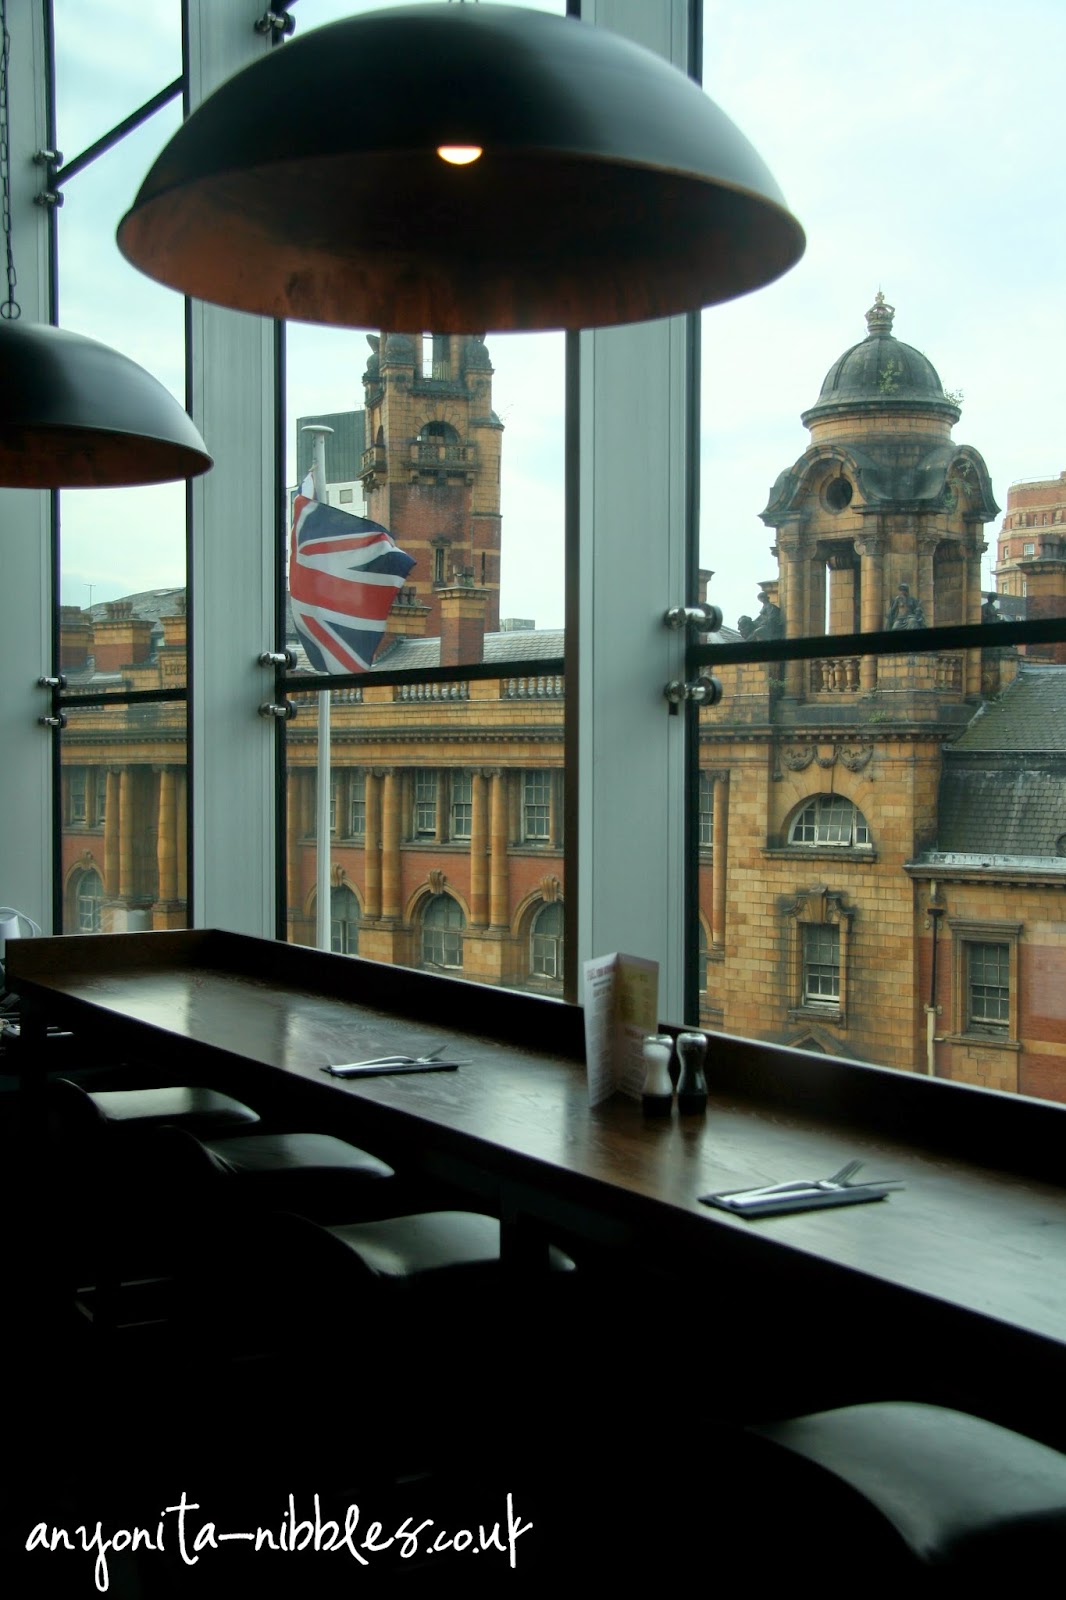 Tables overlooking London street and the abandoned fire station at Manchester Piccadilly | Anyonita-nibbles.co.uk